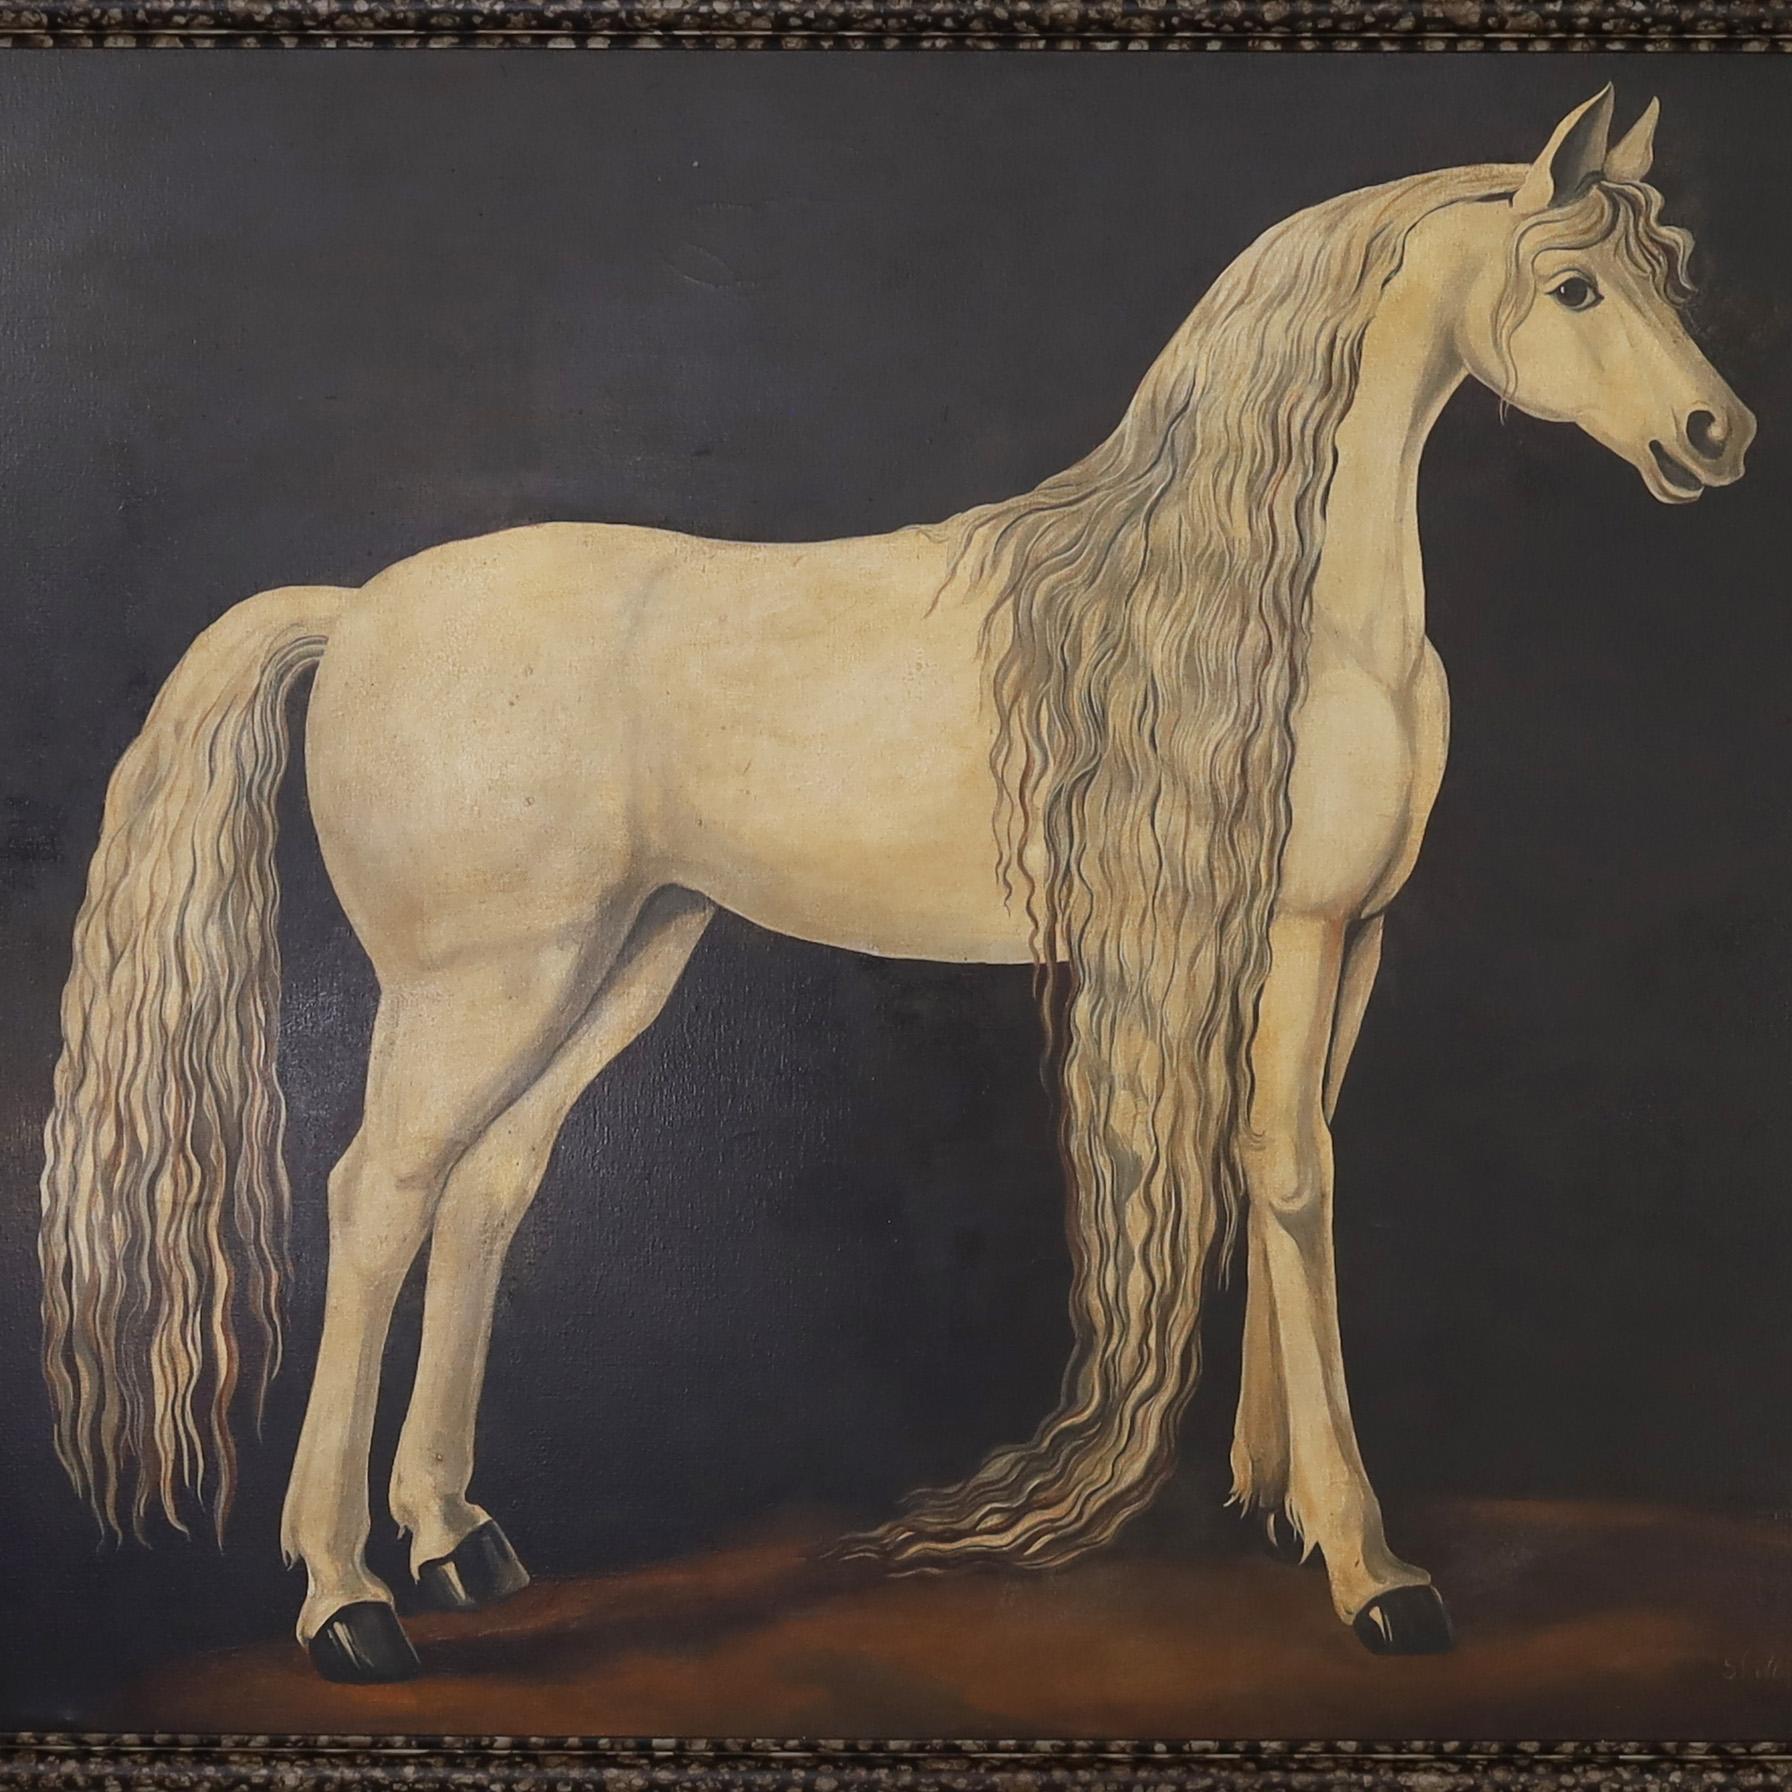 Standout vintage oil painting on canvas of a white horse with a dramatic mane and tail against a stark dark background, executed in a tongue and cheek Victorian parlor style. Signed Skilling in the lower right and presented in a stylized faux